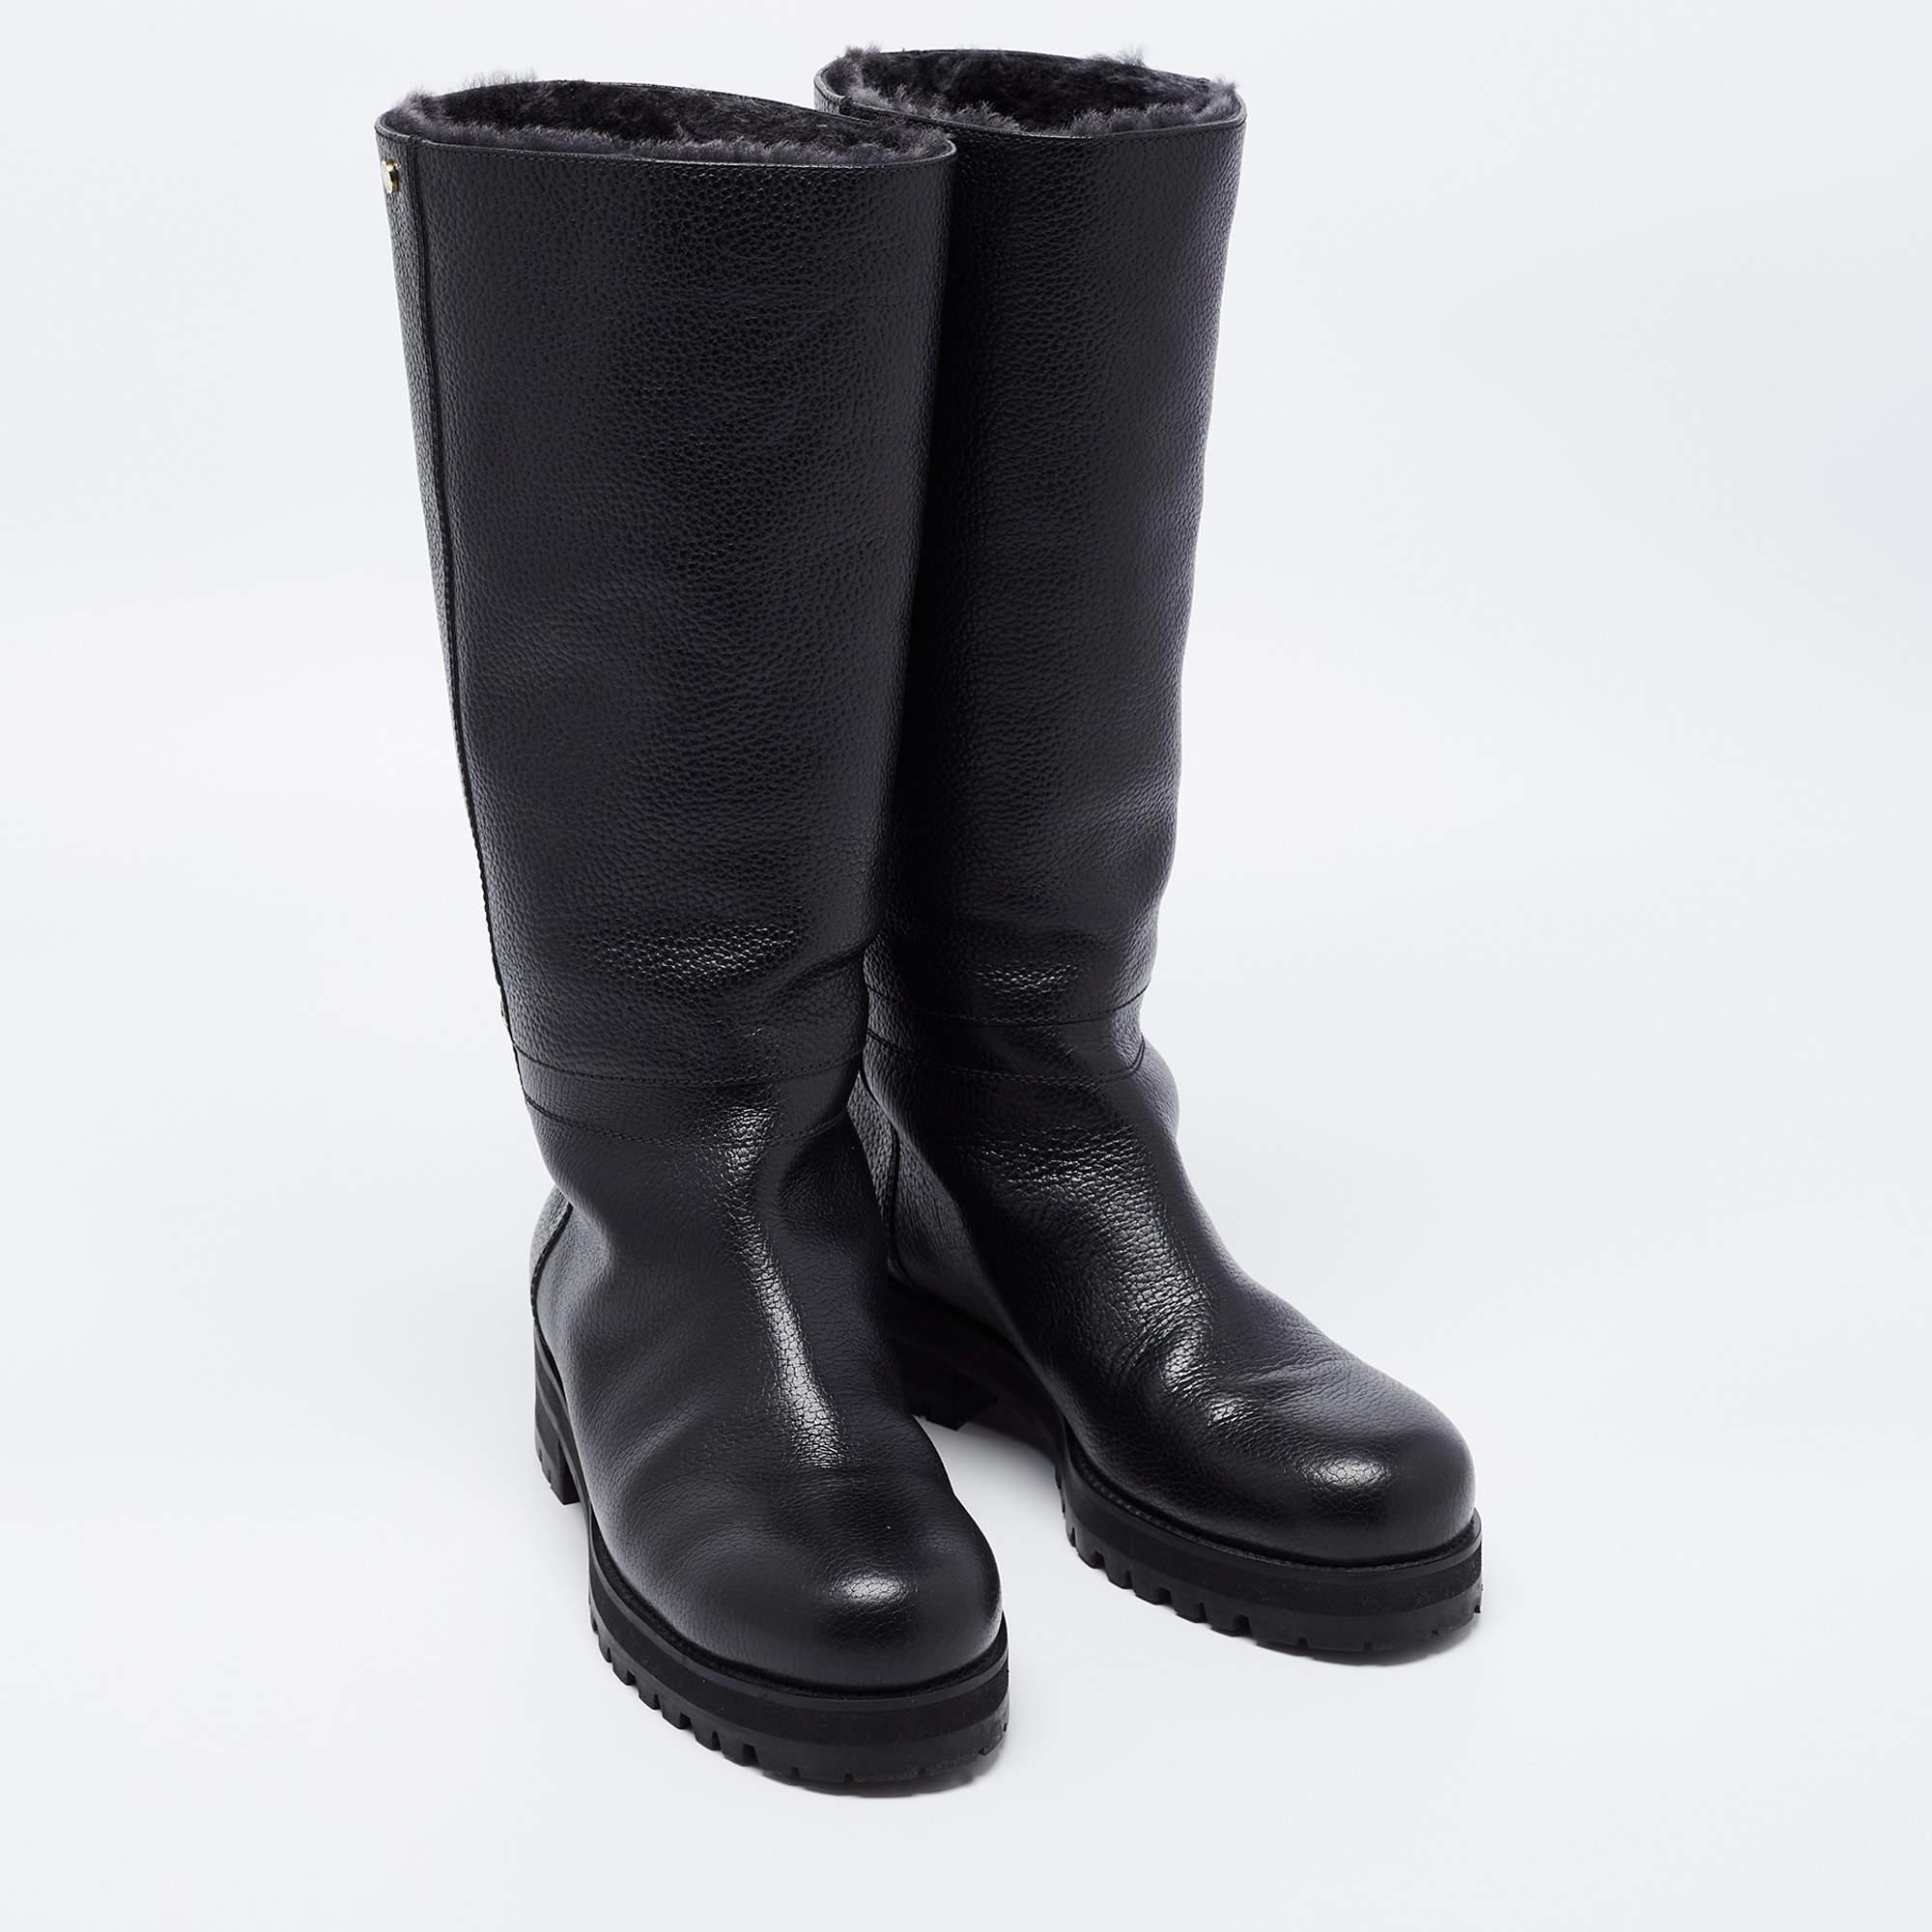 Jimmy Choo Black Leather knee Length Boots Size 40 1